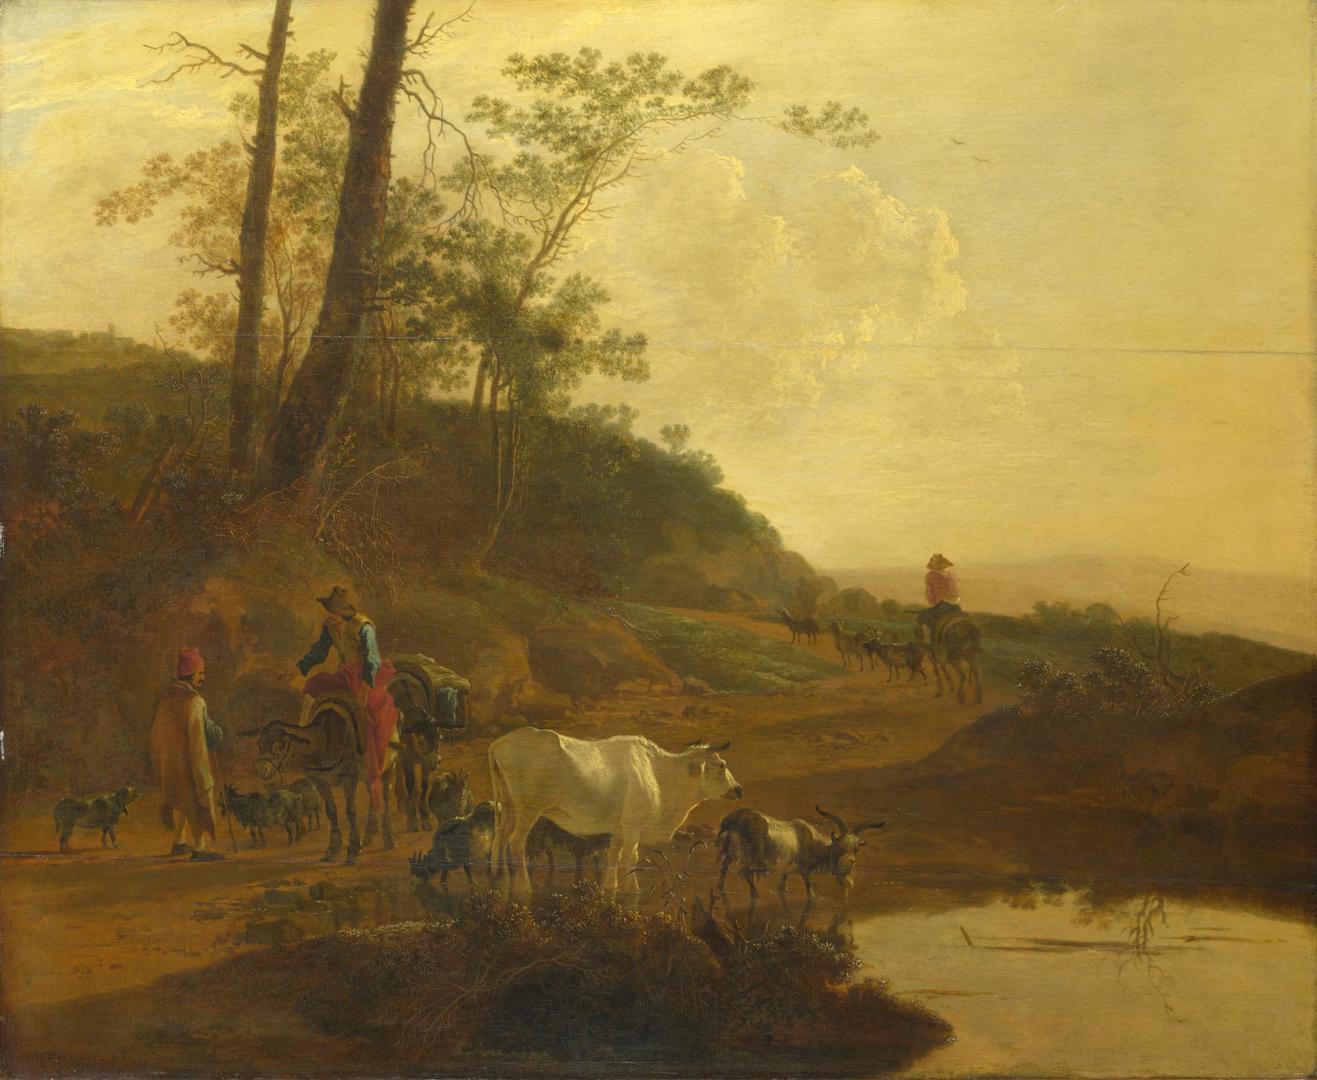 Men with an Ox and Cattle by a Pool by Jan Both